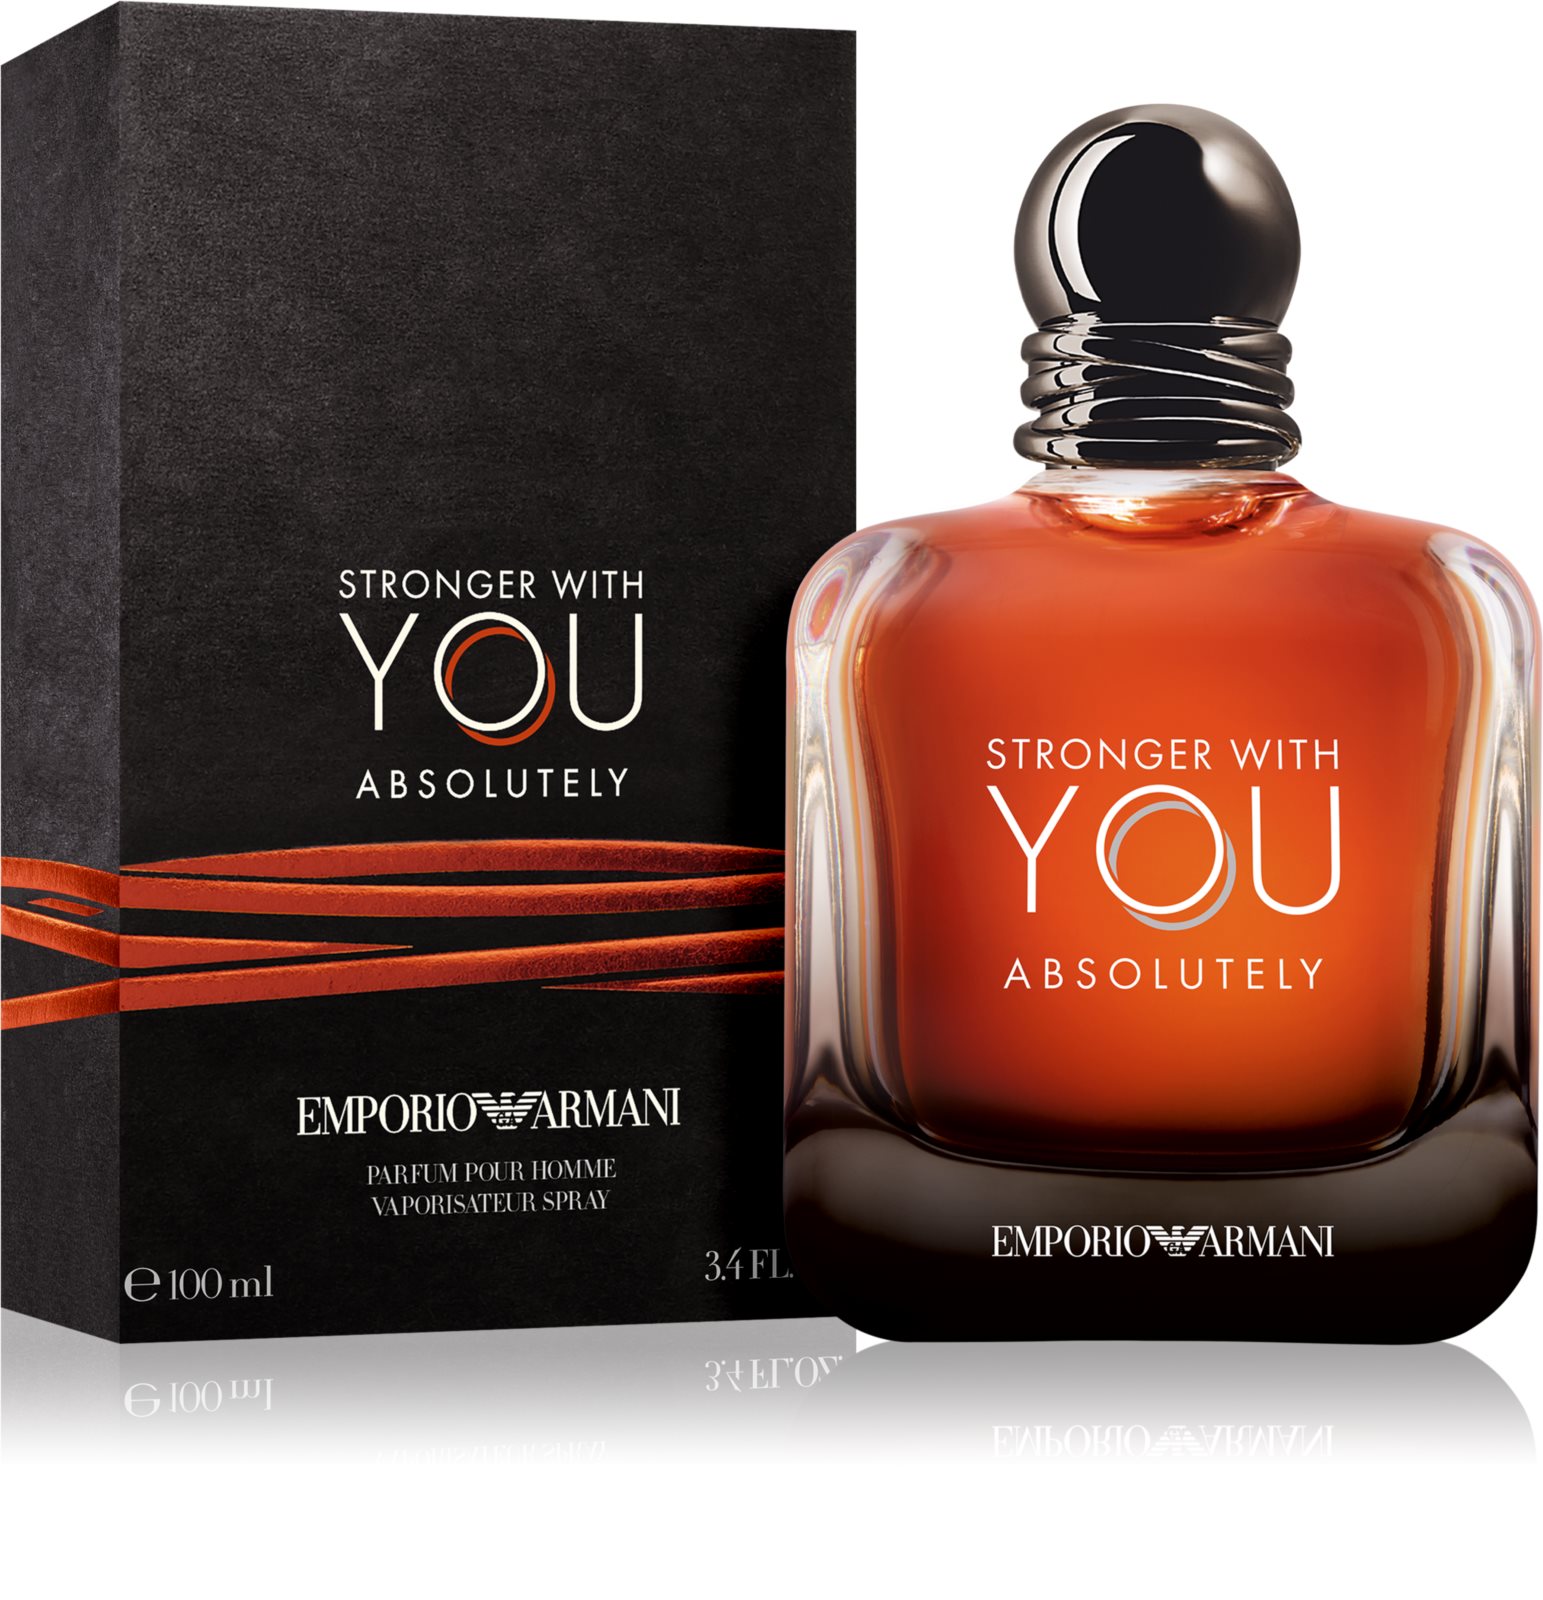 Armani Emporio Stronger With You Absolutely parfém pro muže 100 ml